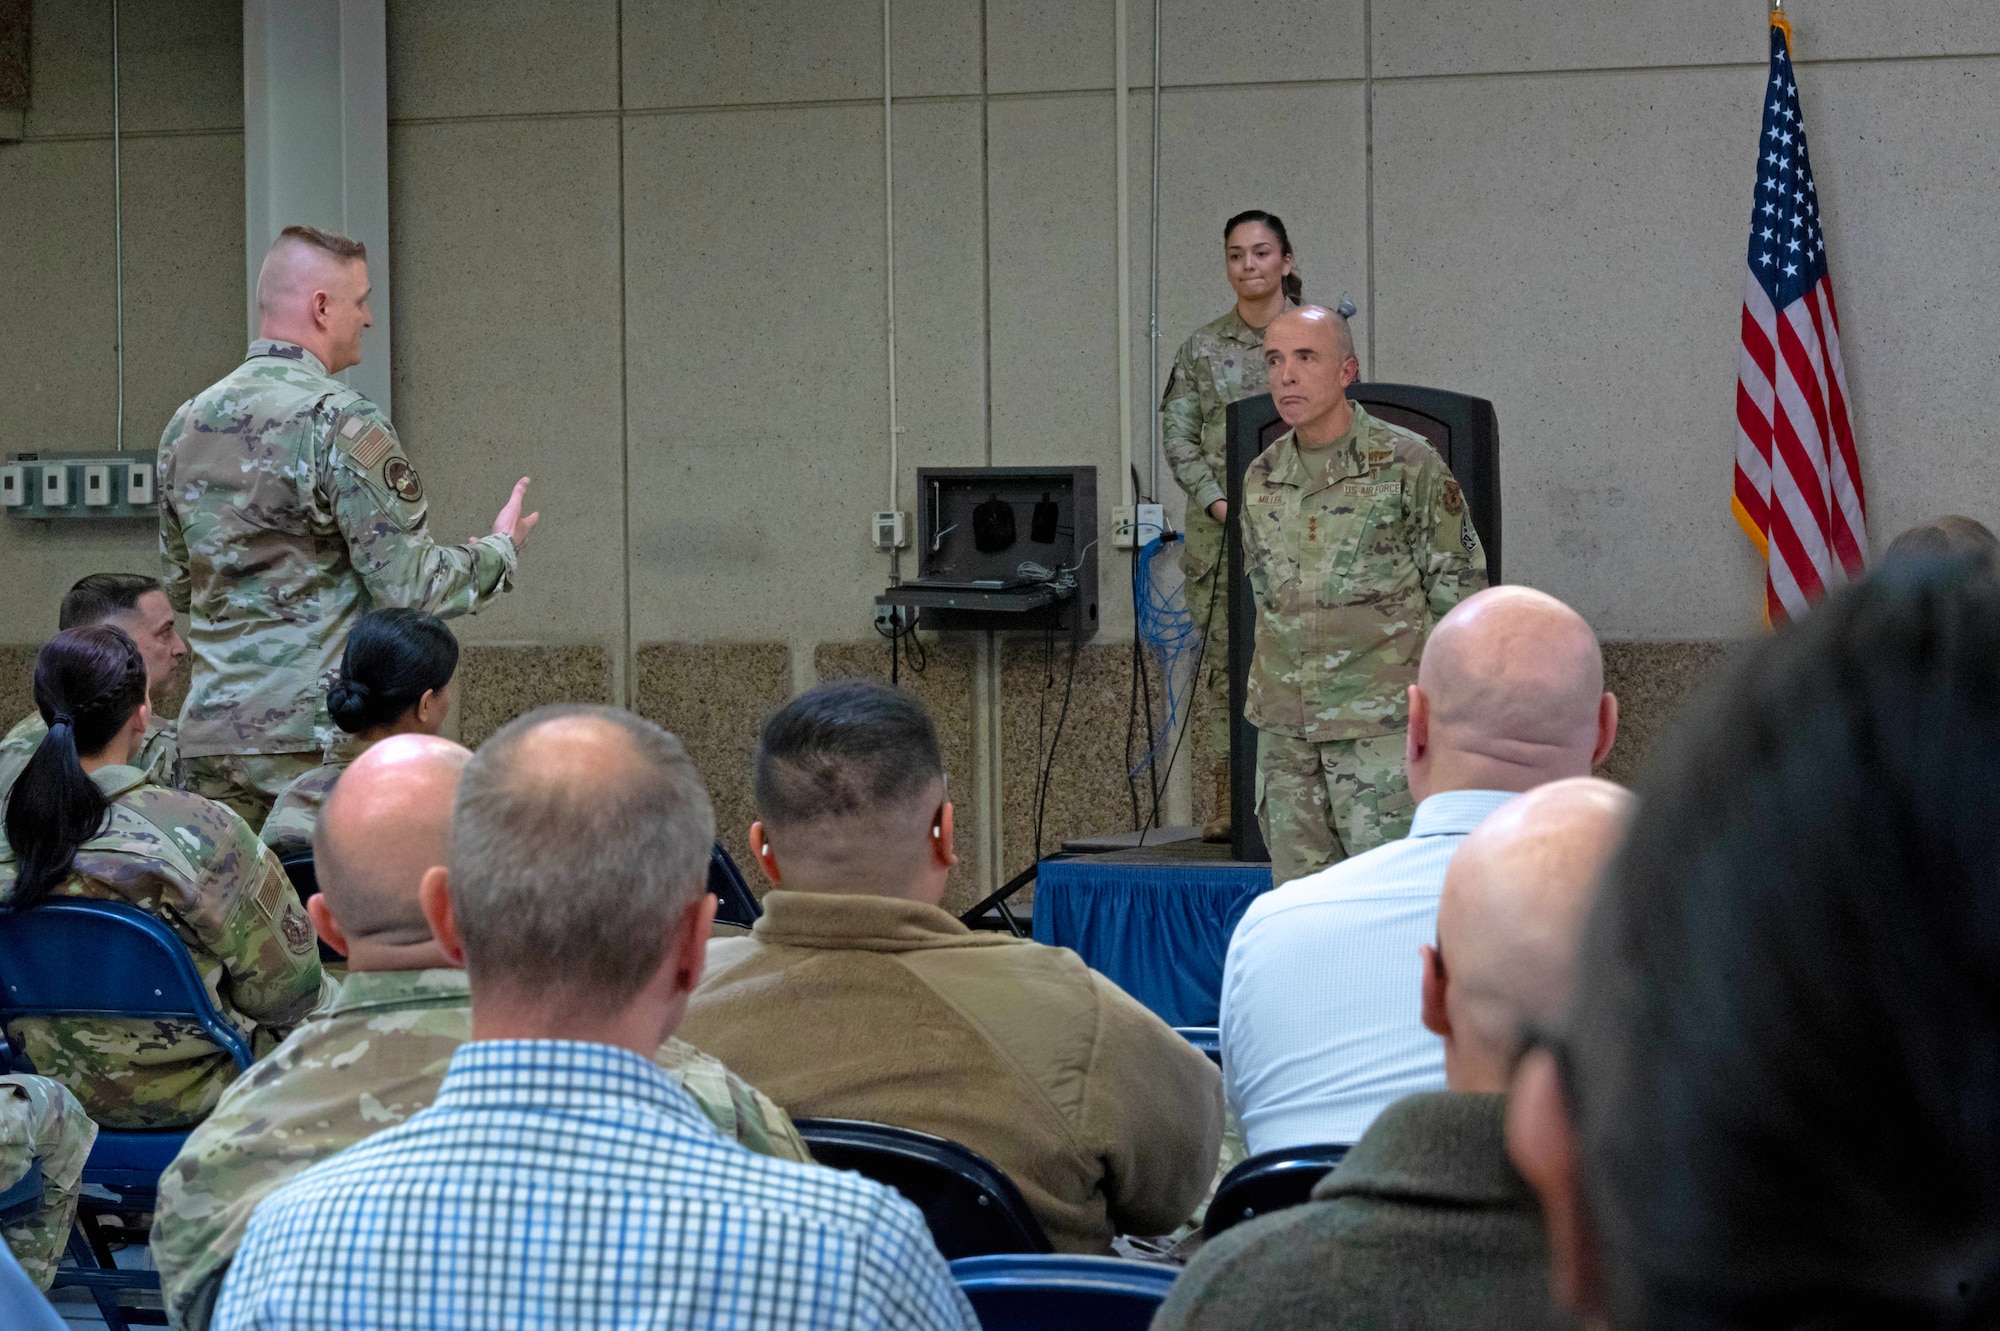 Lt. Gen. Miller stands at the front audience seated in during a town hall meeting.